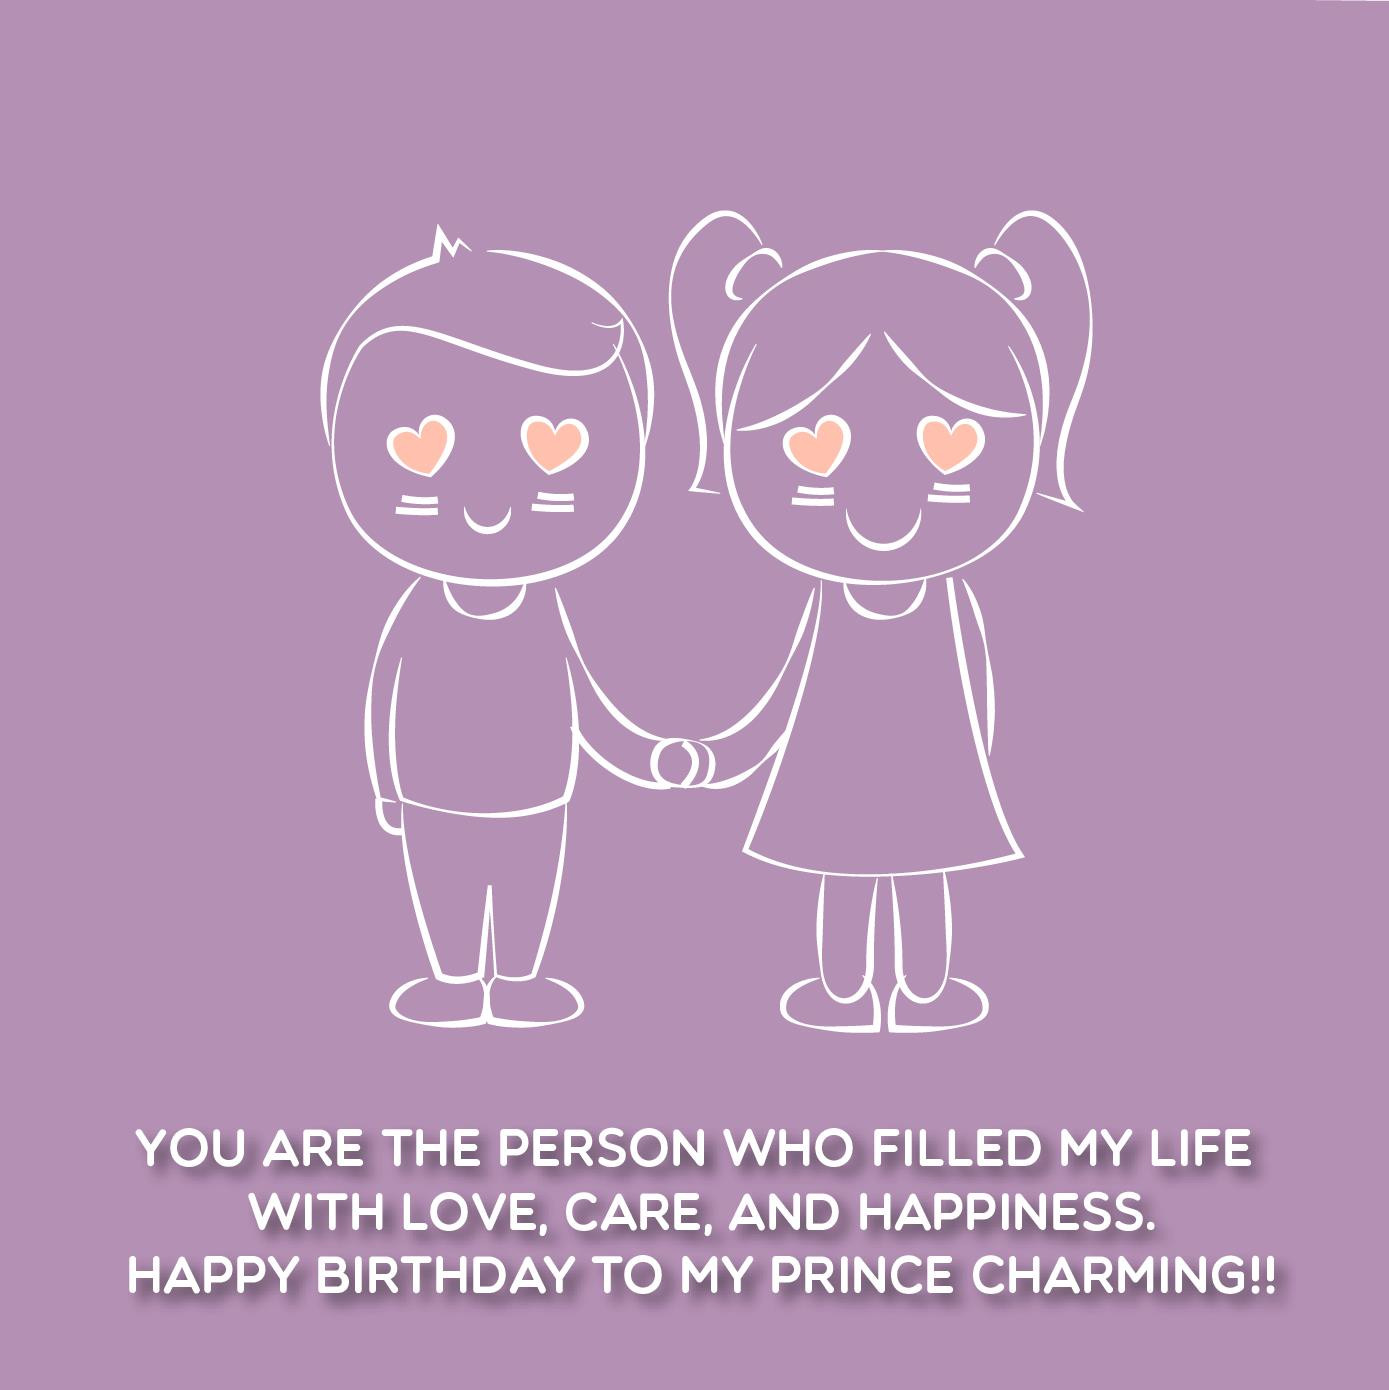 Quotes For Boyfriend Birthday
 The 205 Cute Birthday Quotes For Boyfriend Top Happy